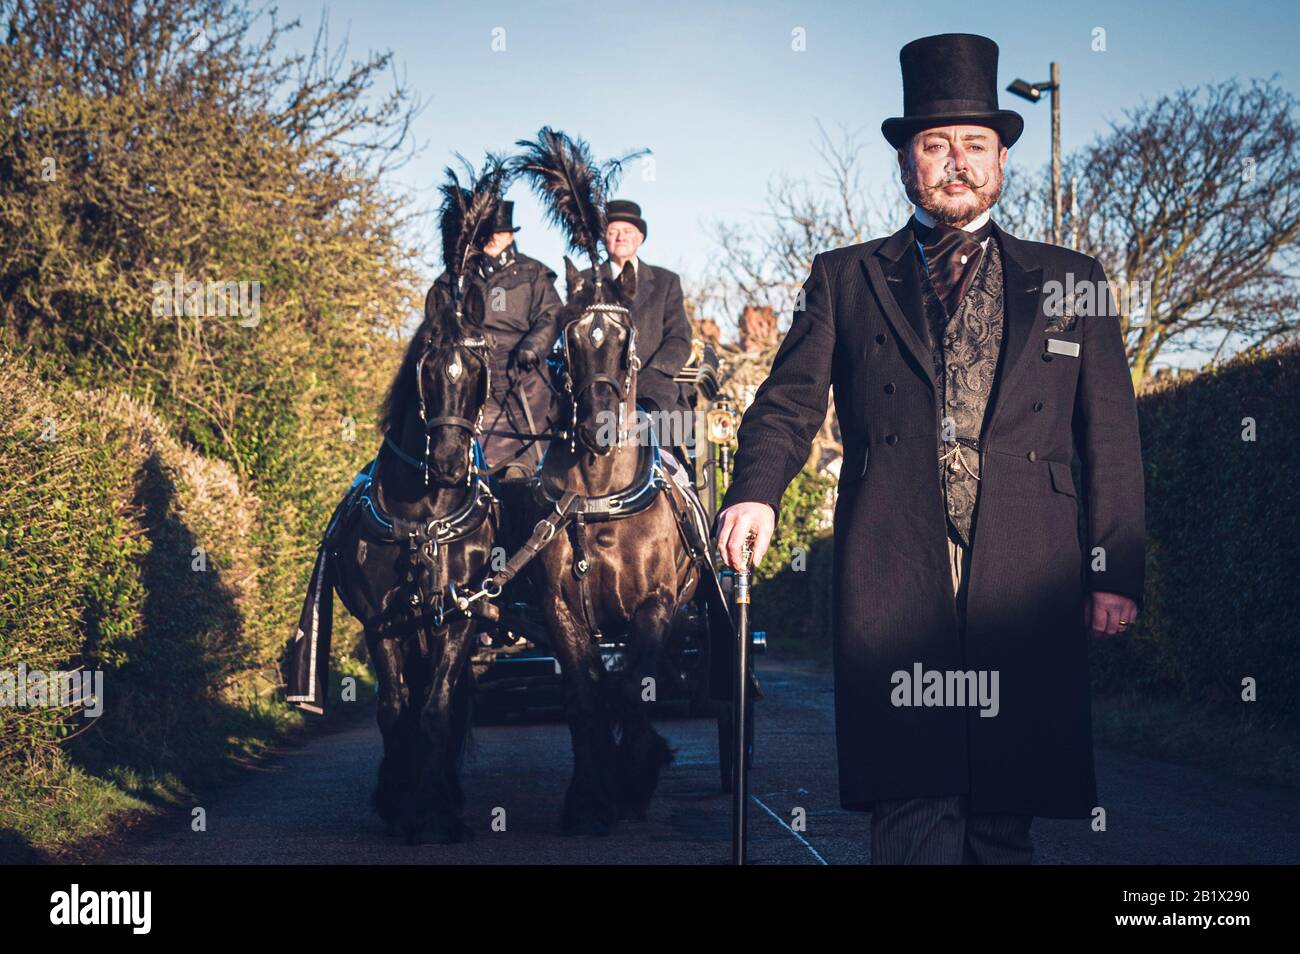 A funeral director, dressed in traditional formal morning dress with top hat, and cane, leads a horse drawn hearse as part of a funeral cortege. Stock Photo